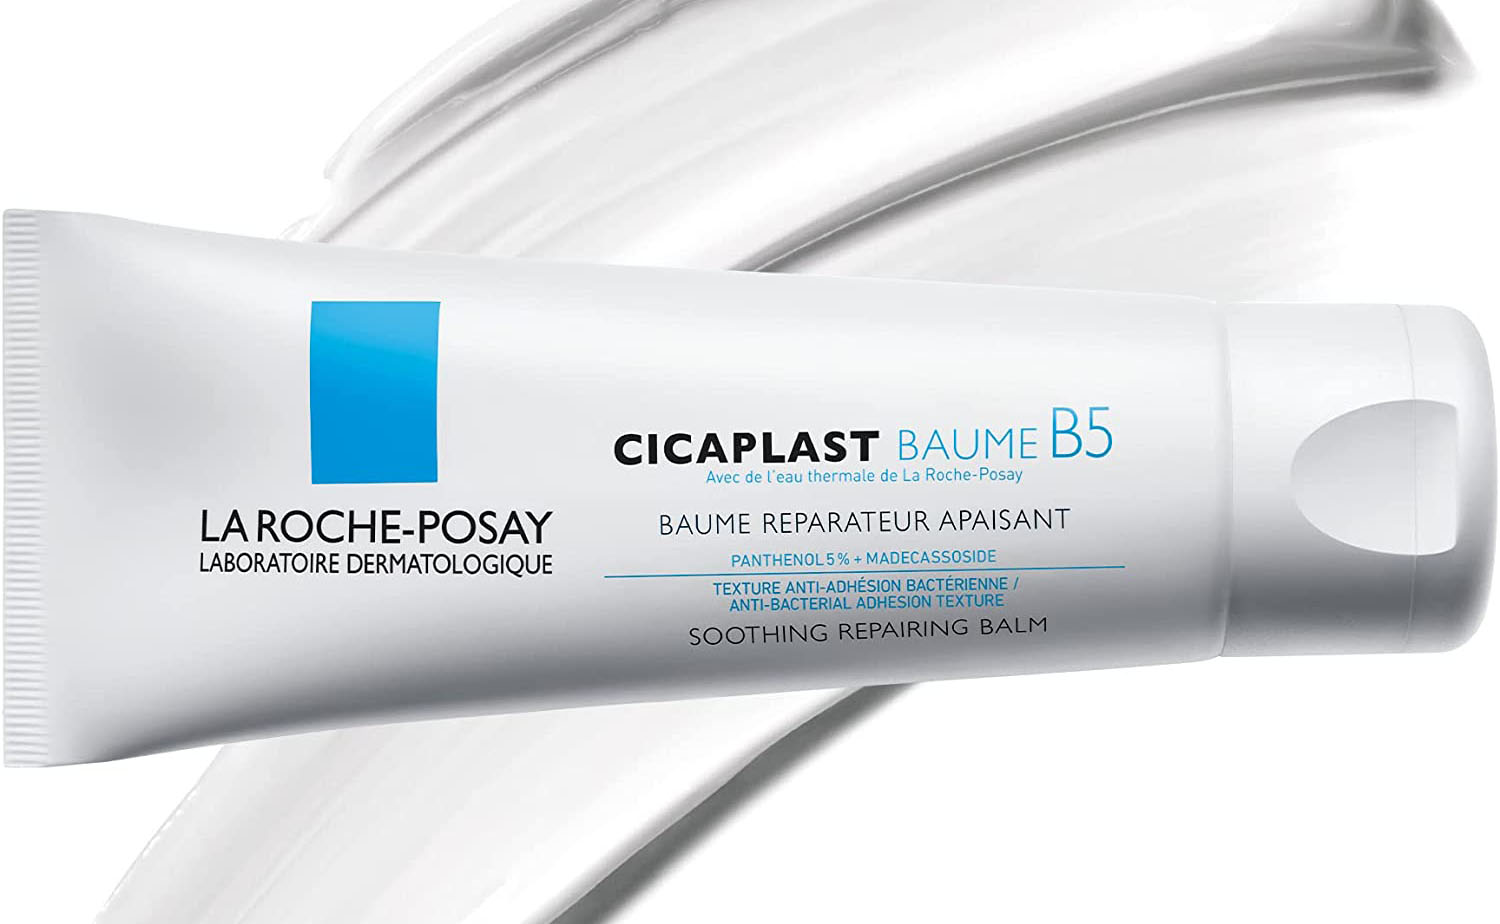 An Expert Guide to La Roche-Posay Cicaplast Baume B5